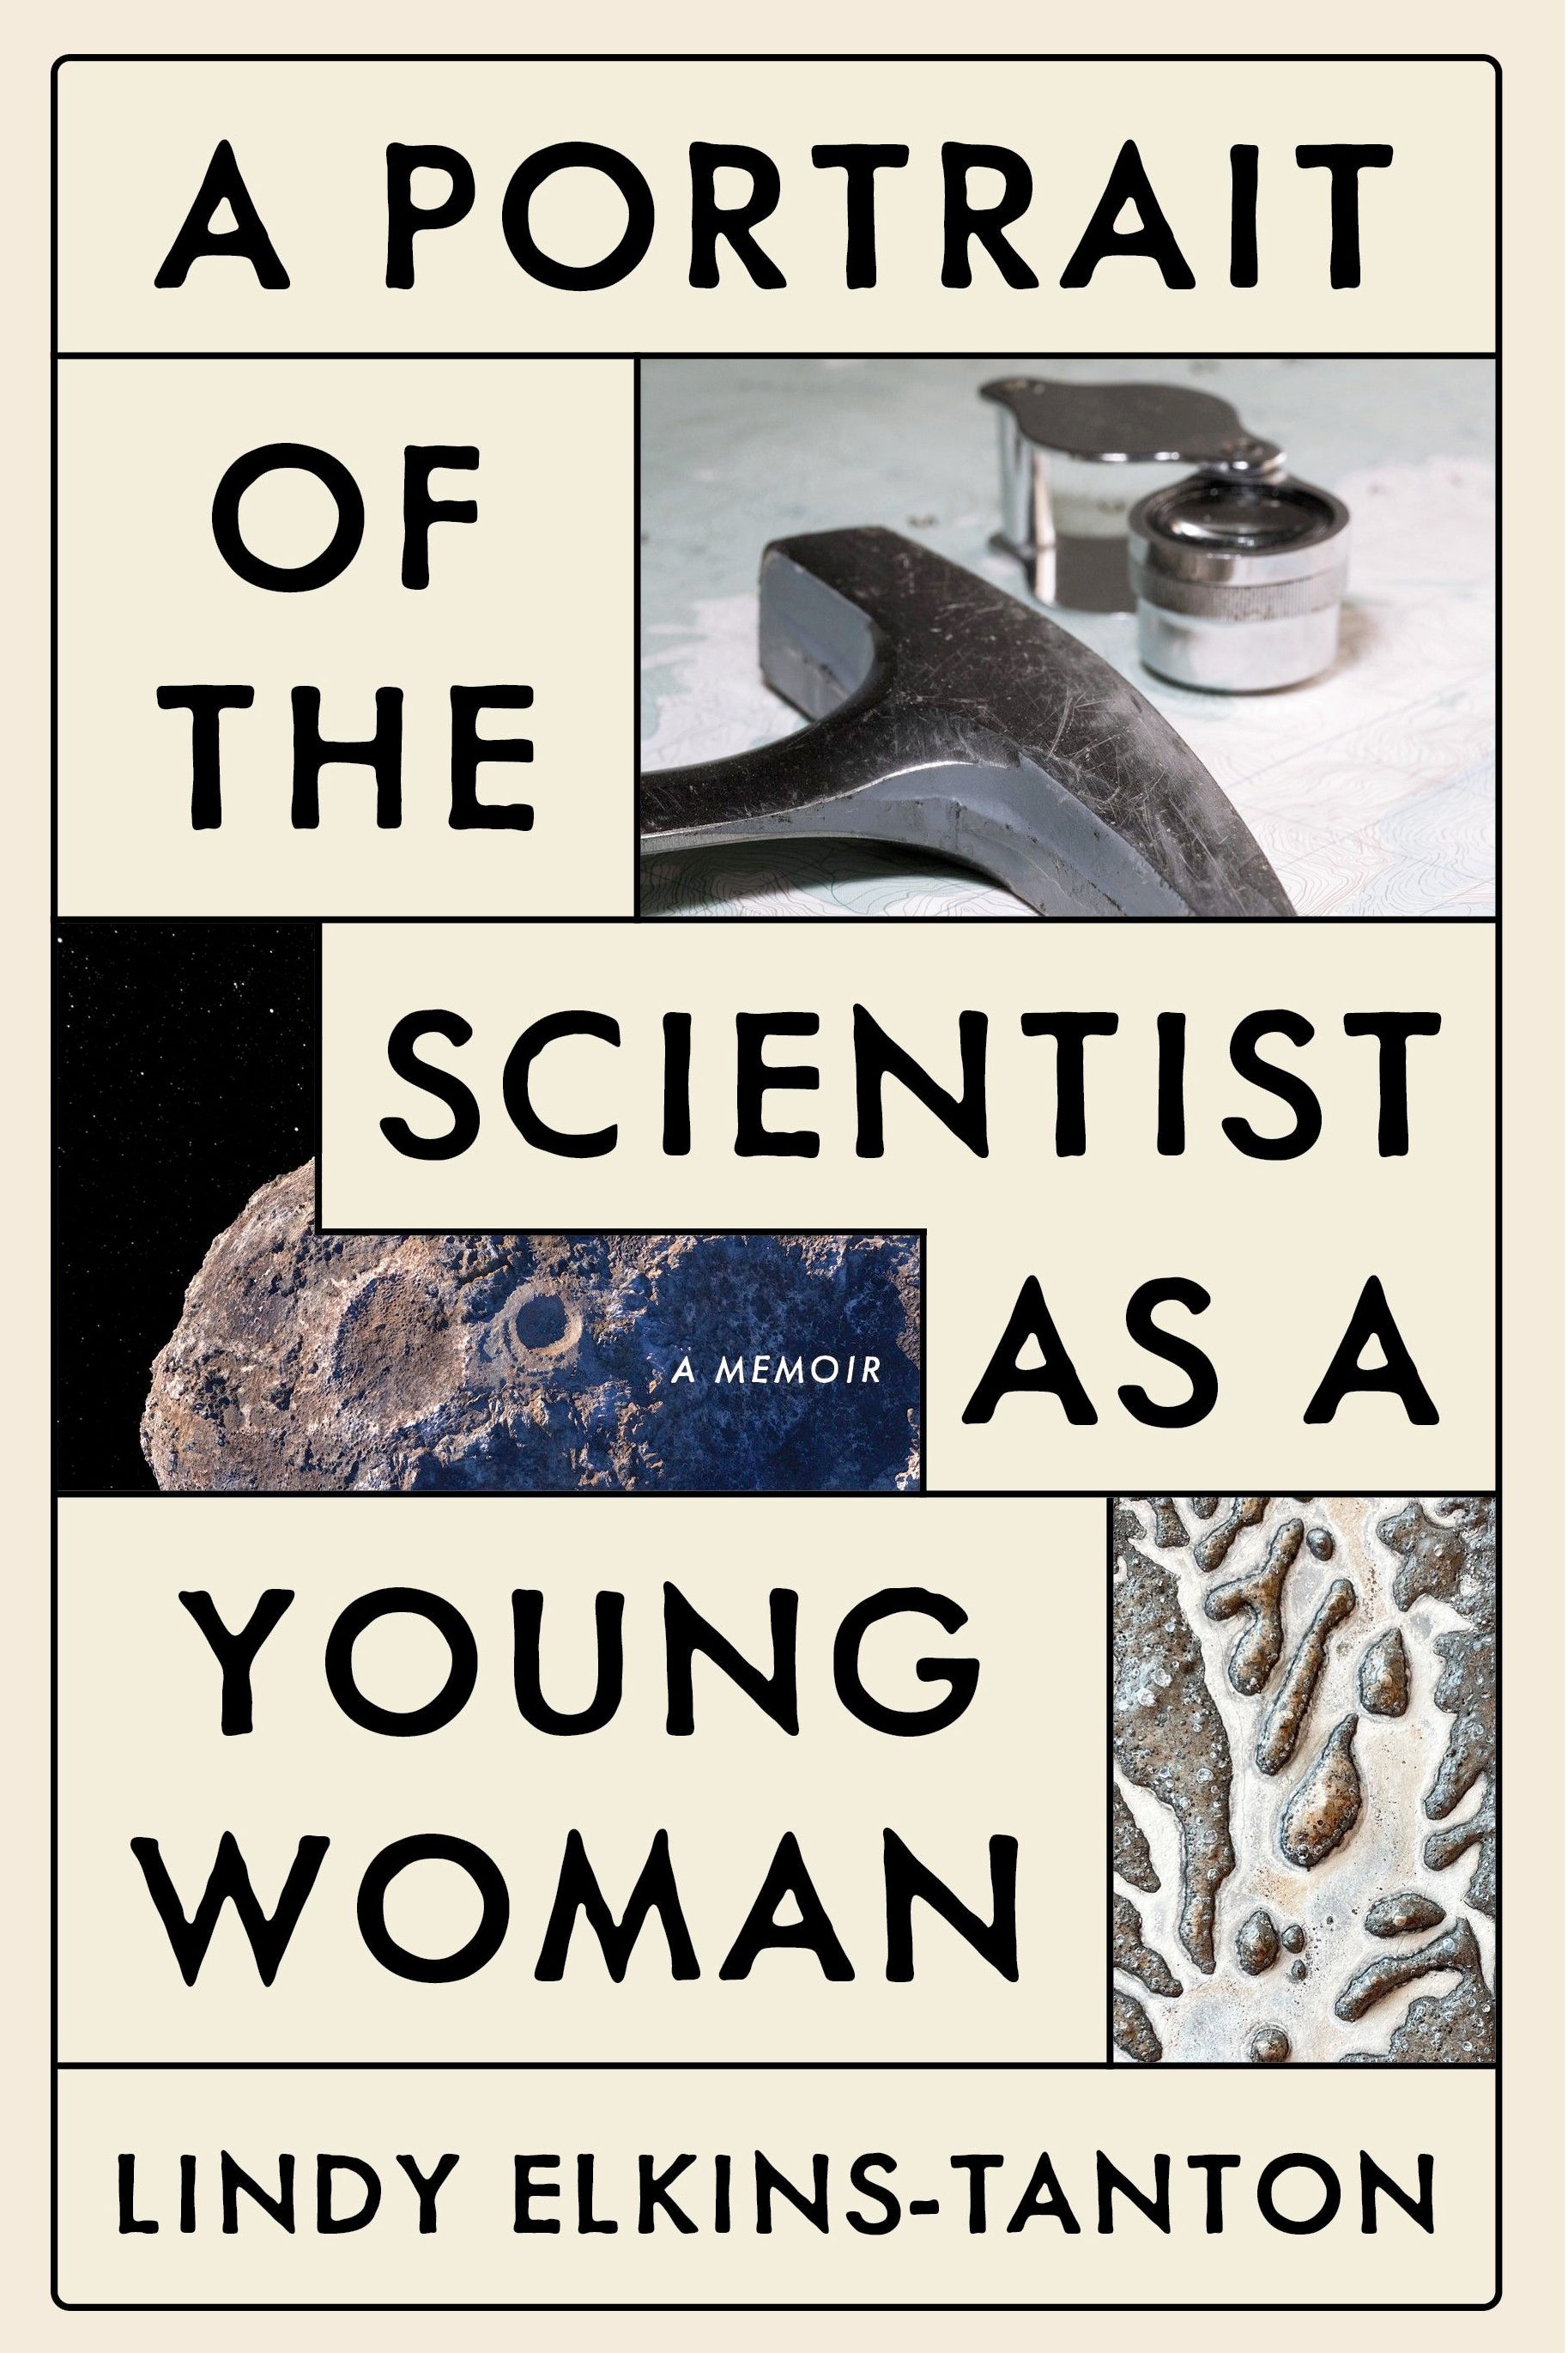 The cover of the book, A Portrait of the Scientist as a Young Woman